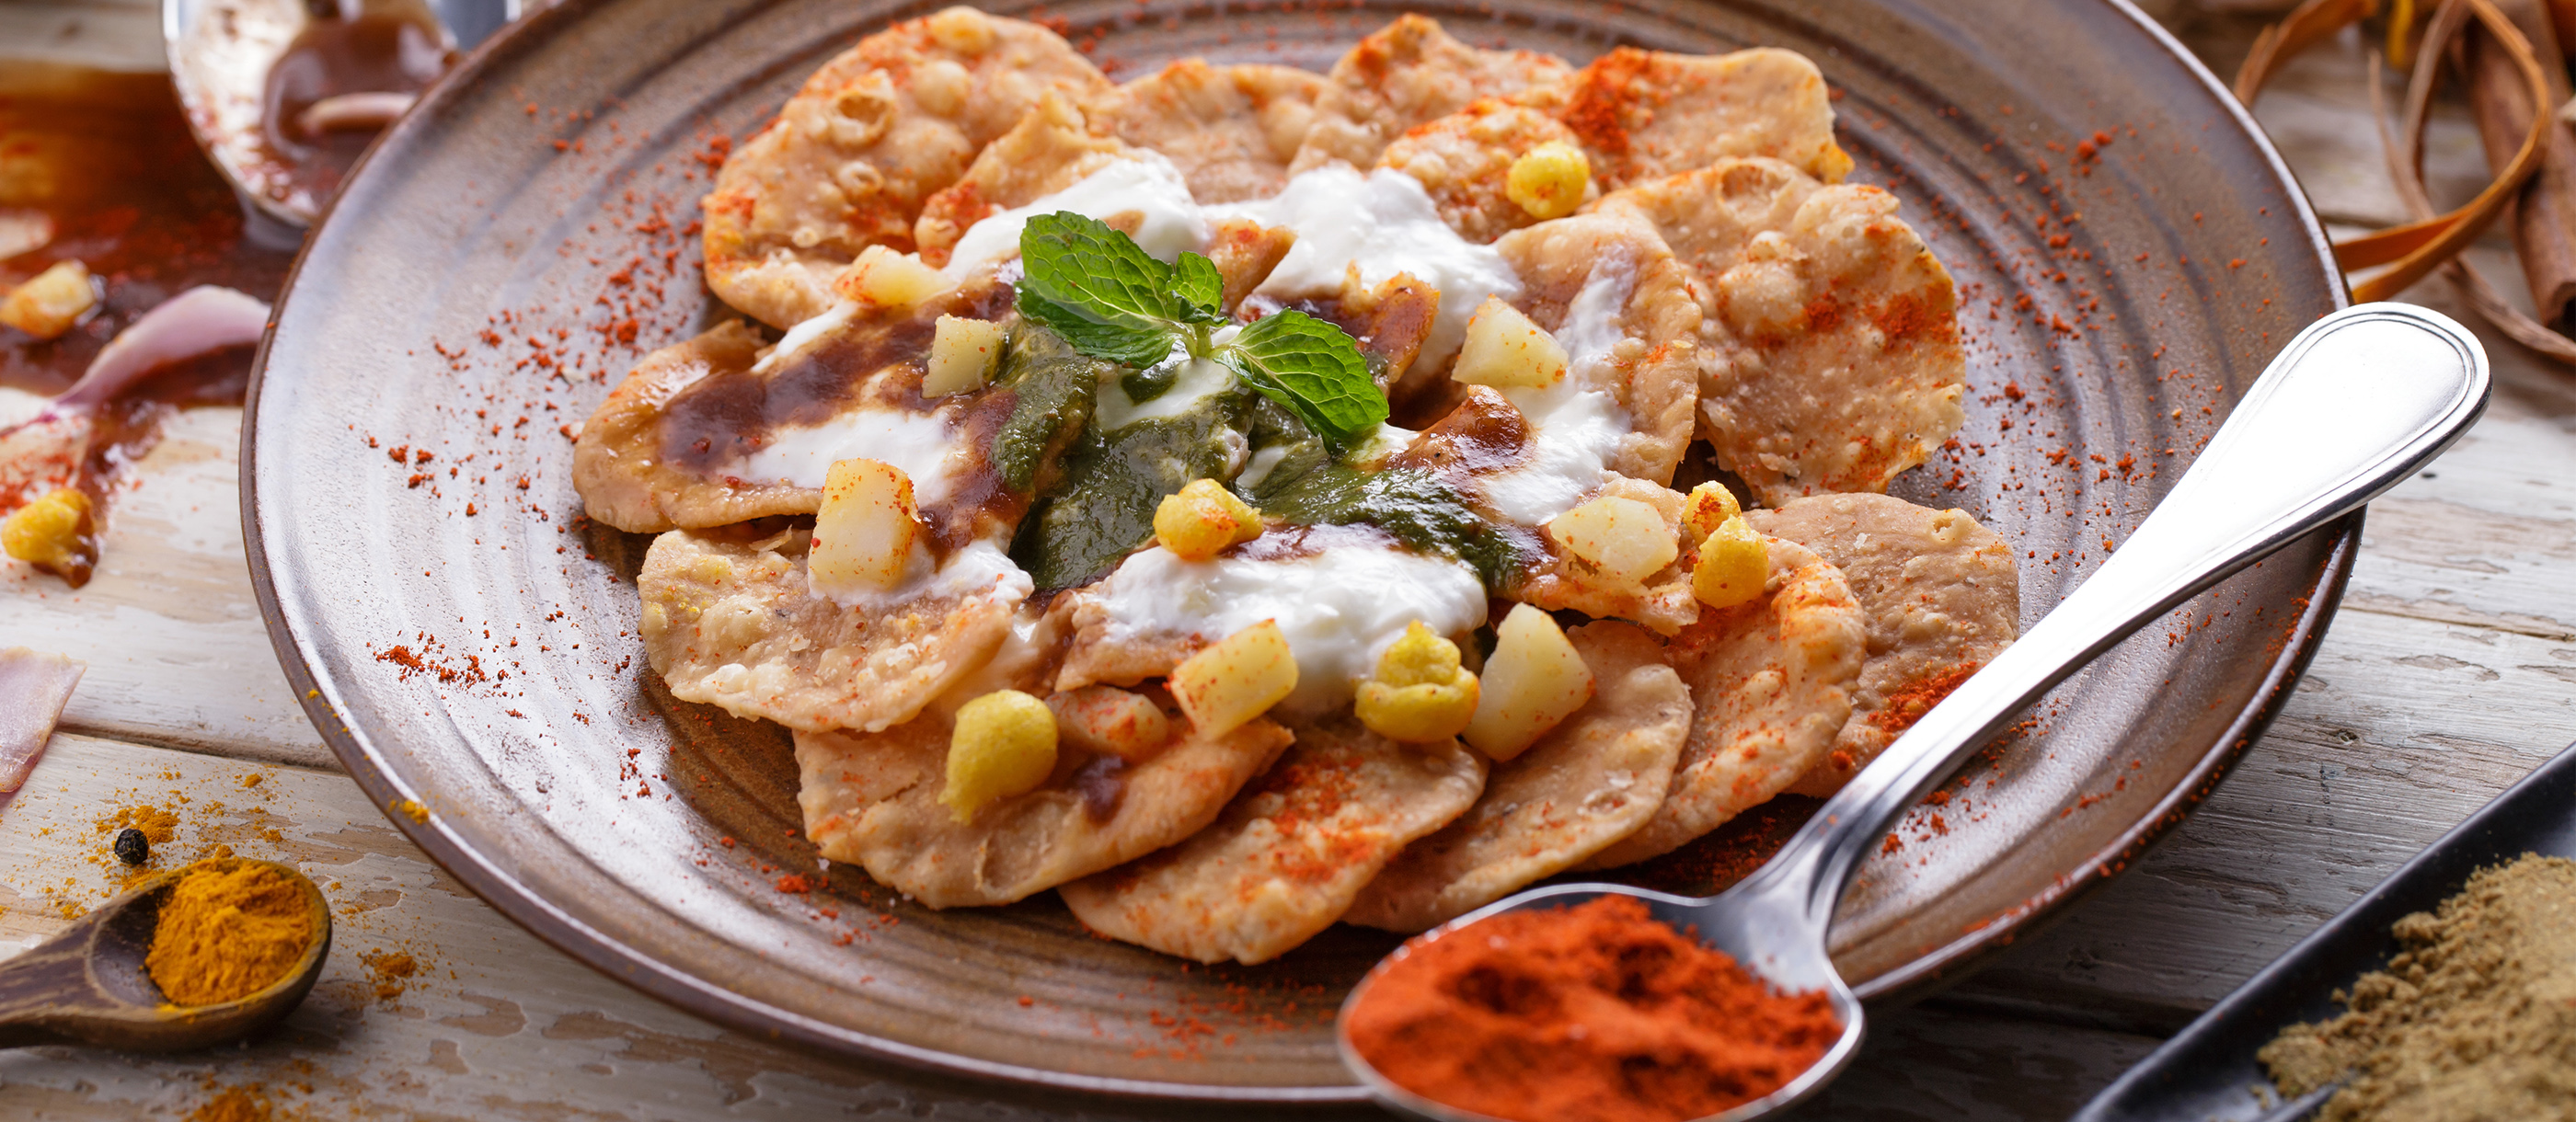 Papri Chaat | Traditional Snack From India